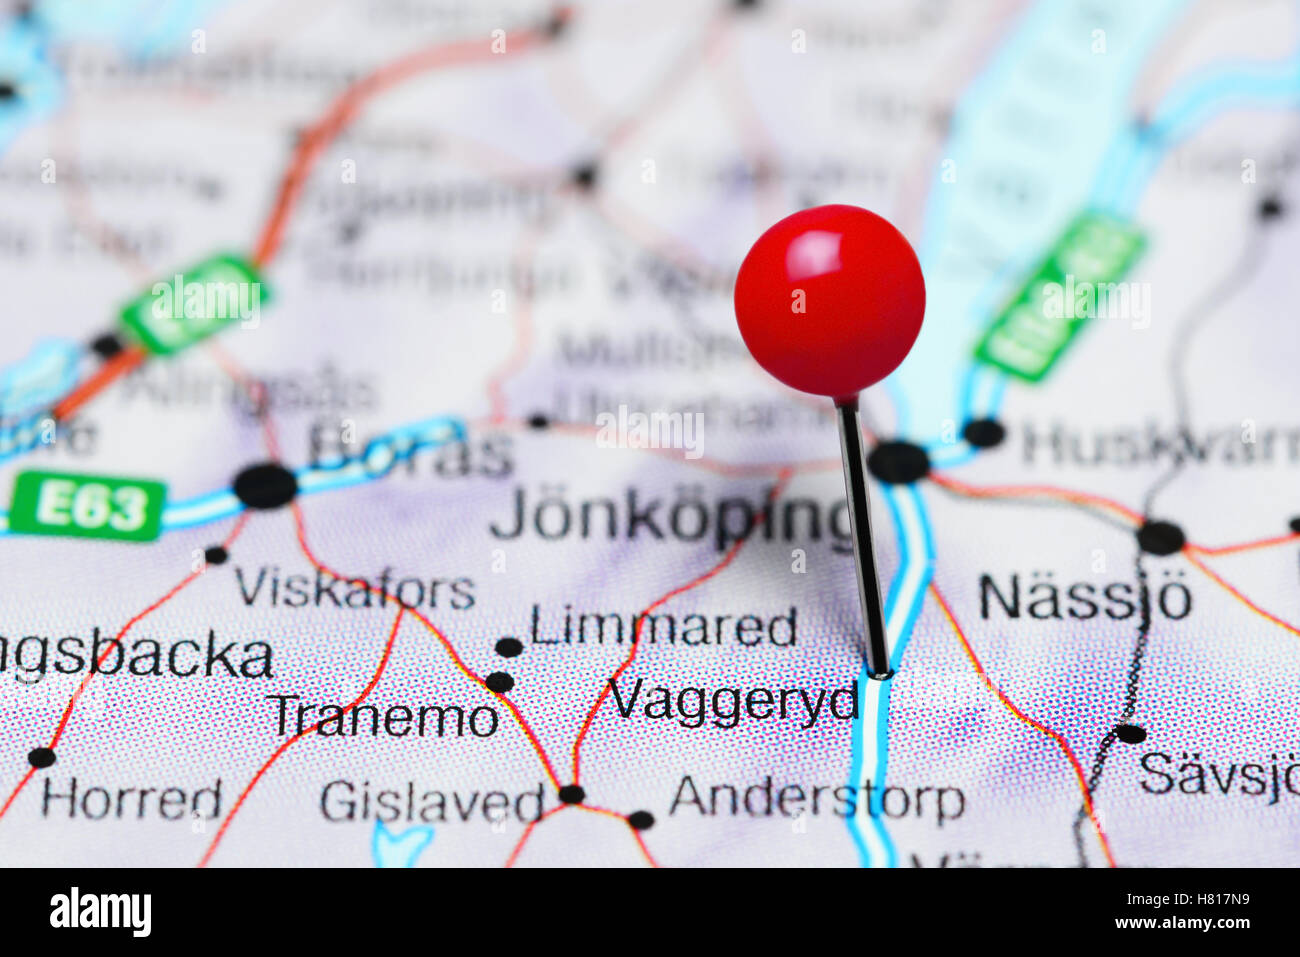 Vaggeryd pinned on a map of Sweden Stock Photo